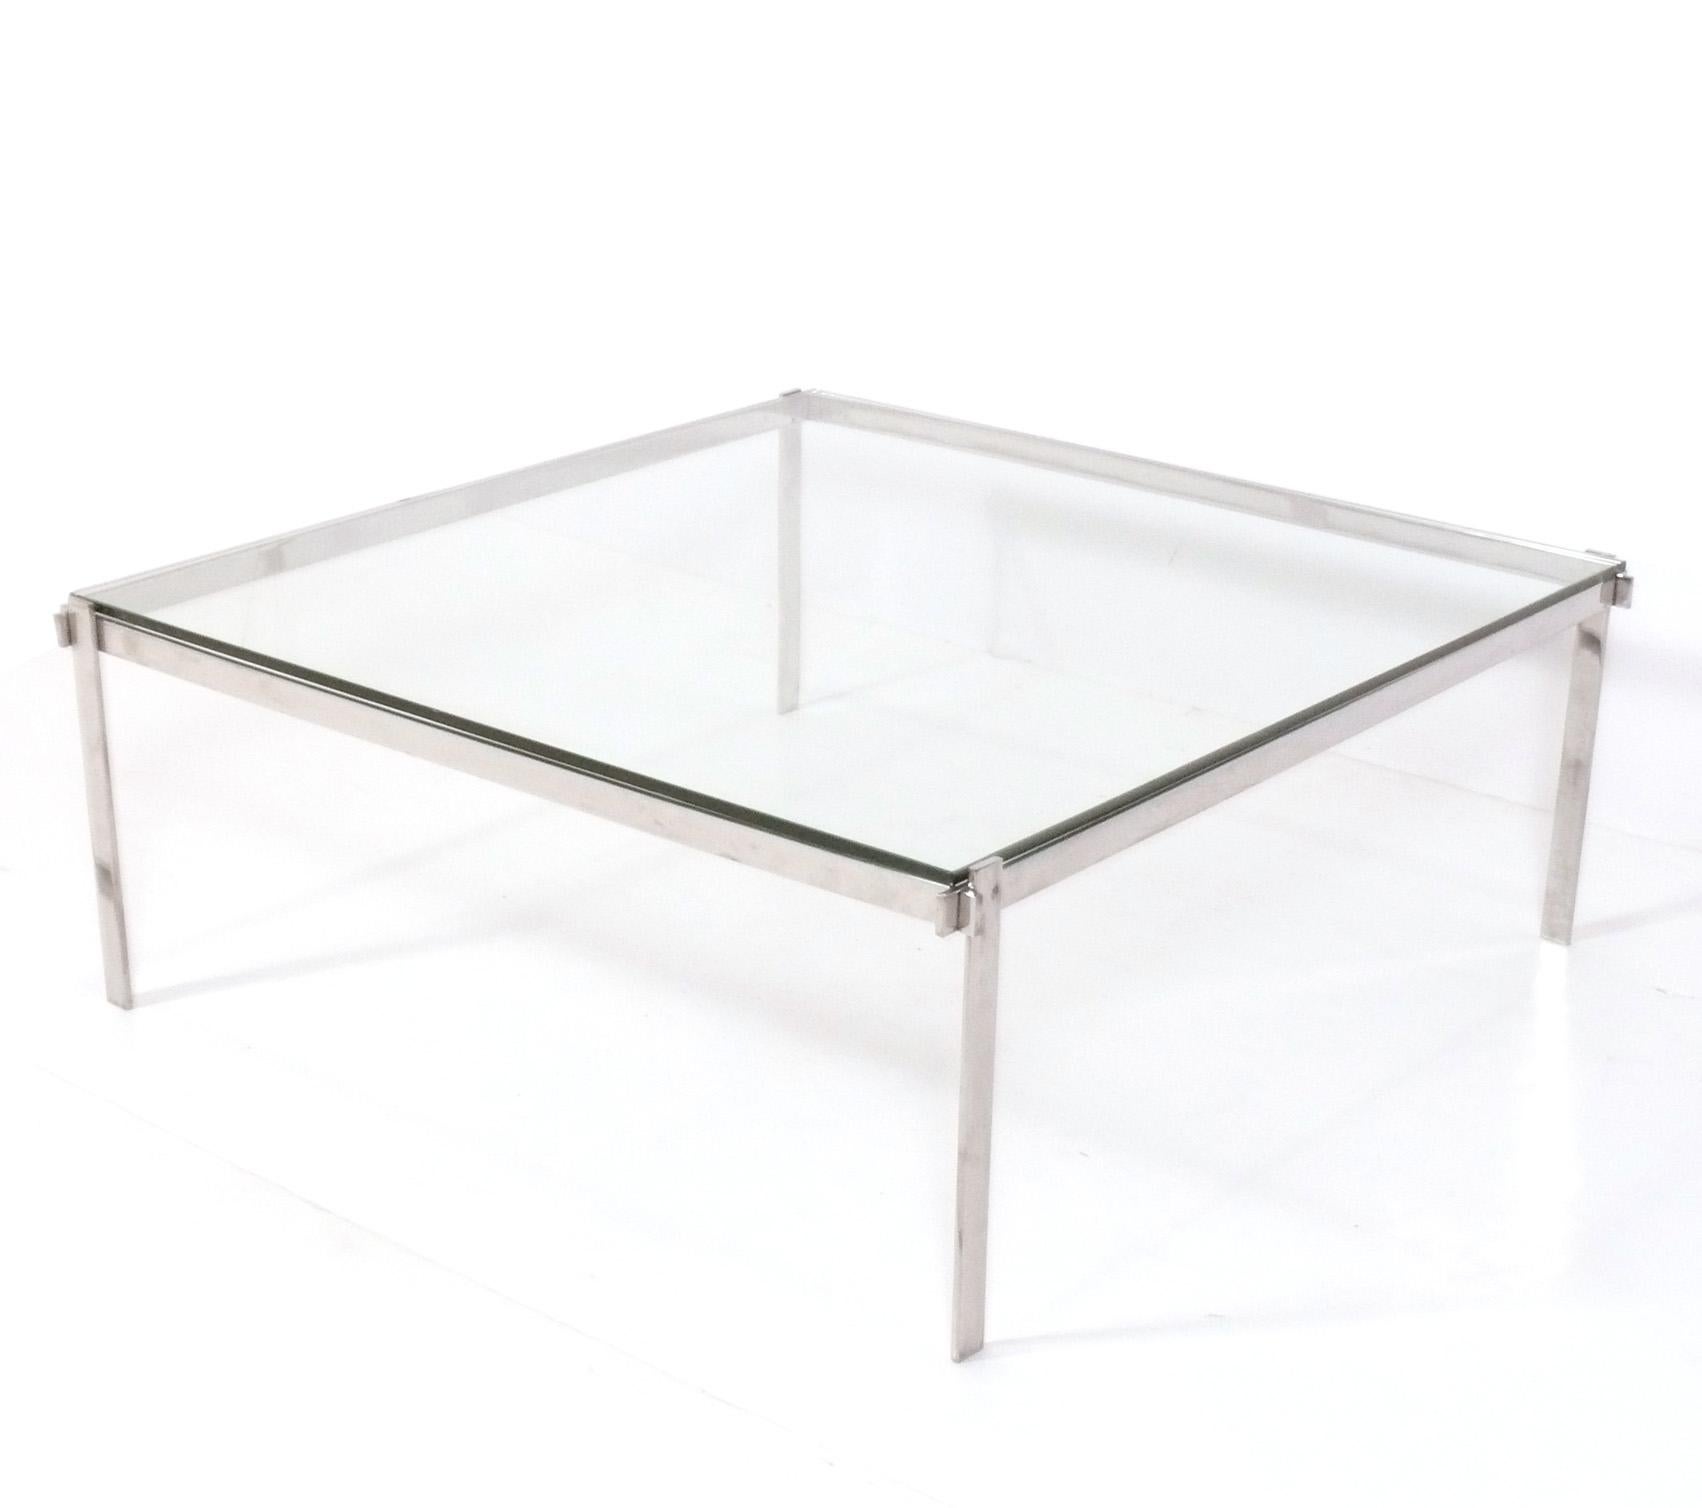 Clean Lined Architectural Chrome Coffee Table, in the manner of Poul Kjaerholm, probably American, circa 1960s. It has a low slung form with simple clean lined joinery.